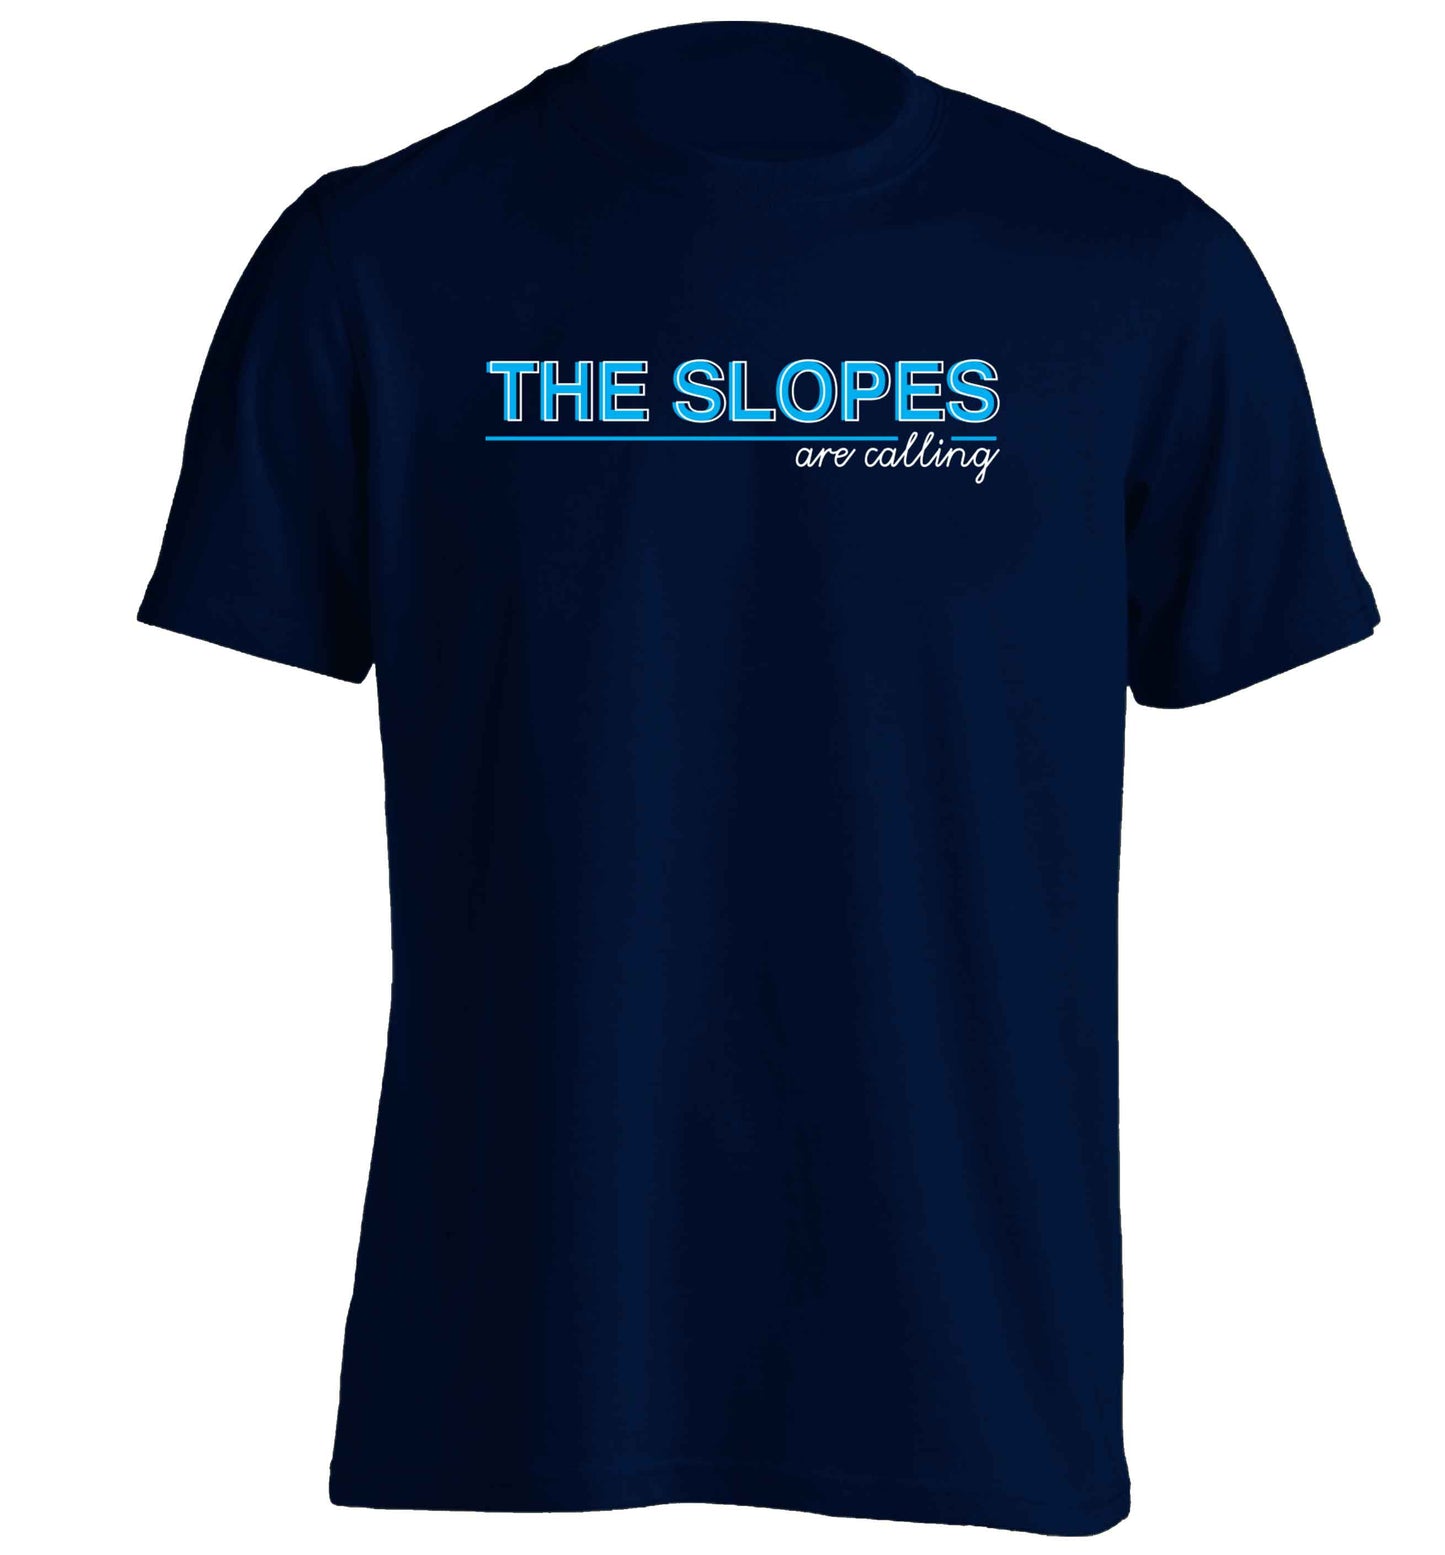 The slopes are calling adults unisex navy Tshirt 2XL